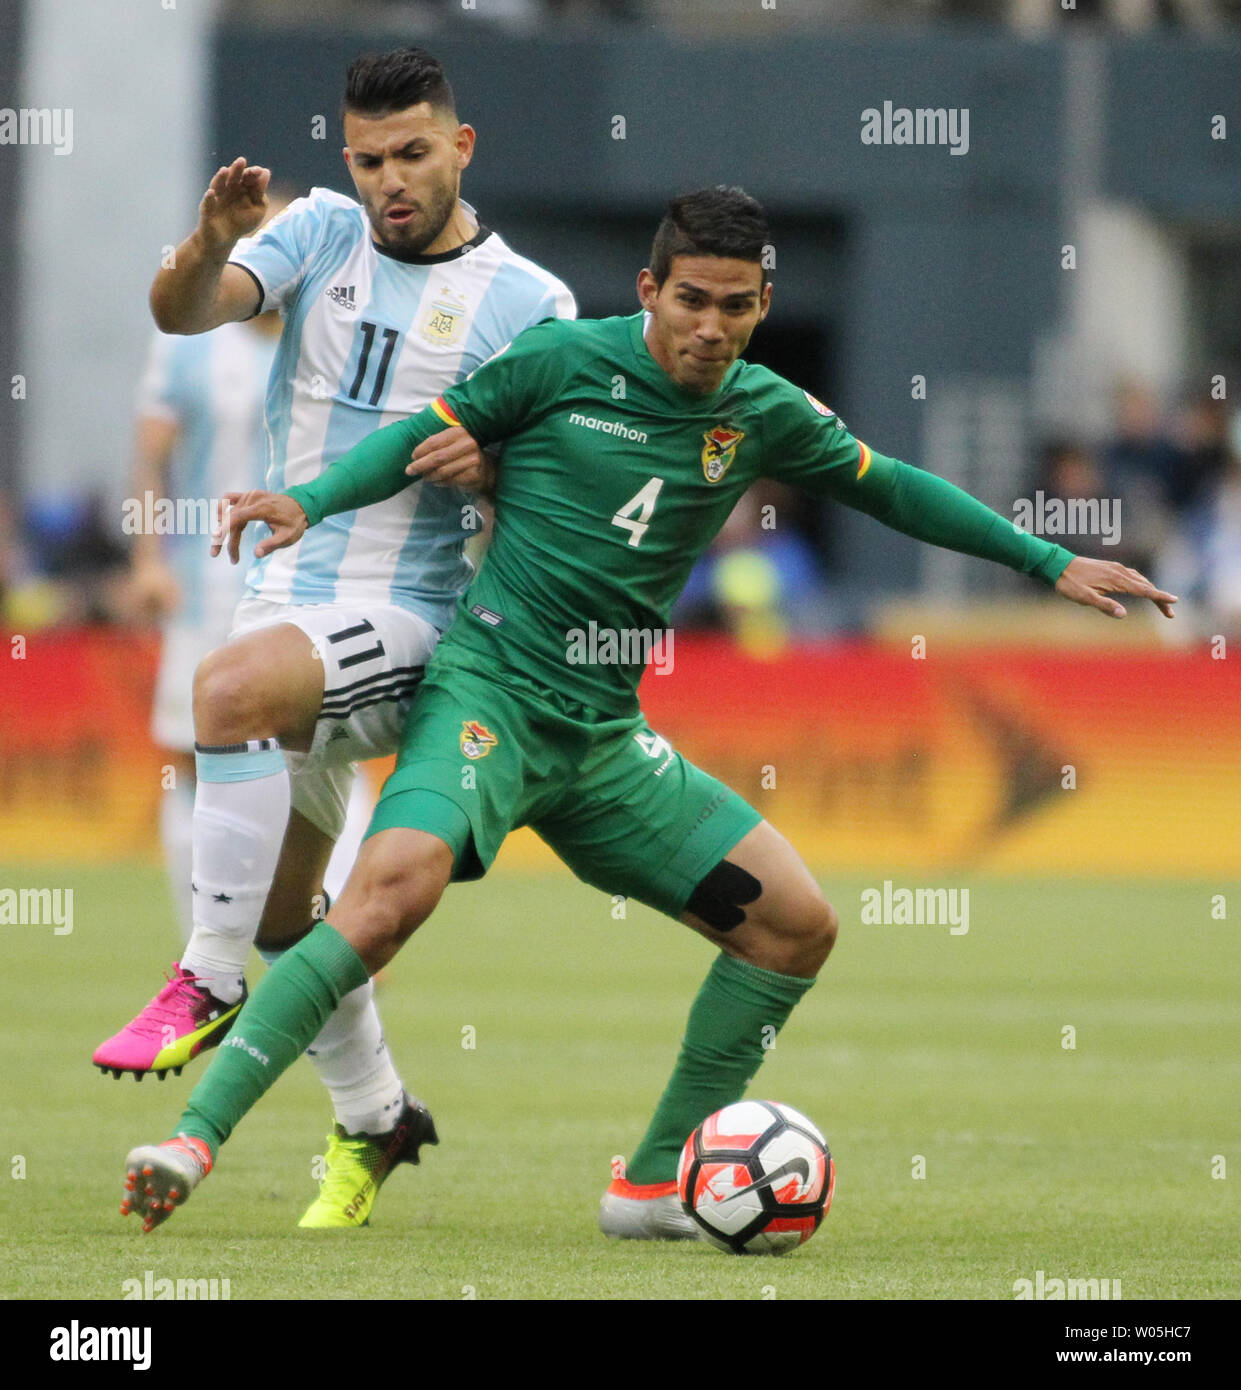 Bolivia's Diego Bejarano (4) takes the ball away from Argentina's Sergio Aguero (11) in a 2016 Copa America Centenario soccer match at CenturyLink Field in Seattle, Washington on June 14, 2016.  Argentina beat Bolivia 3-0.   Photo by Jim Bryant/ UPI Stock Photo